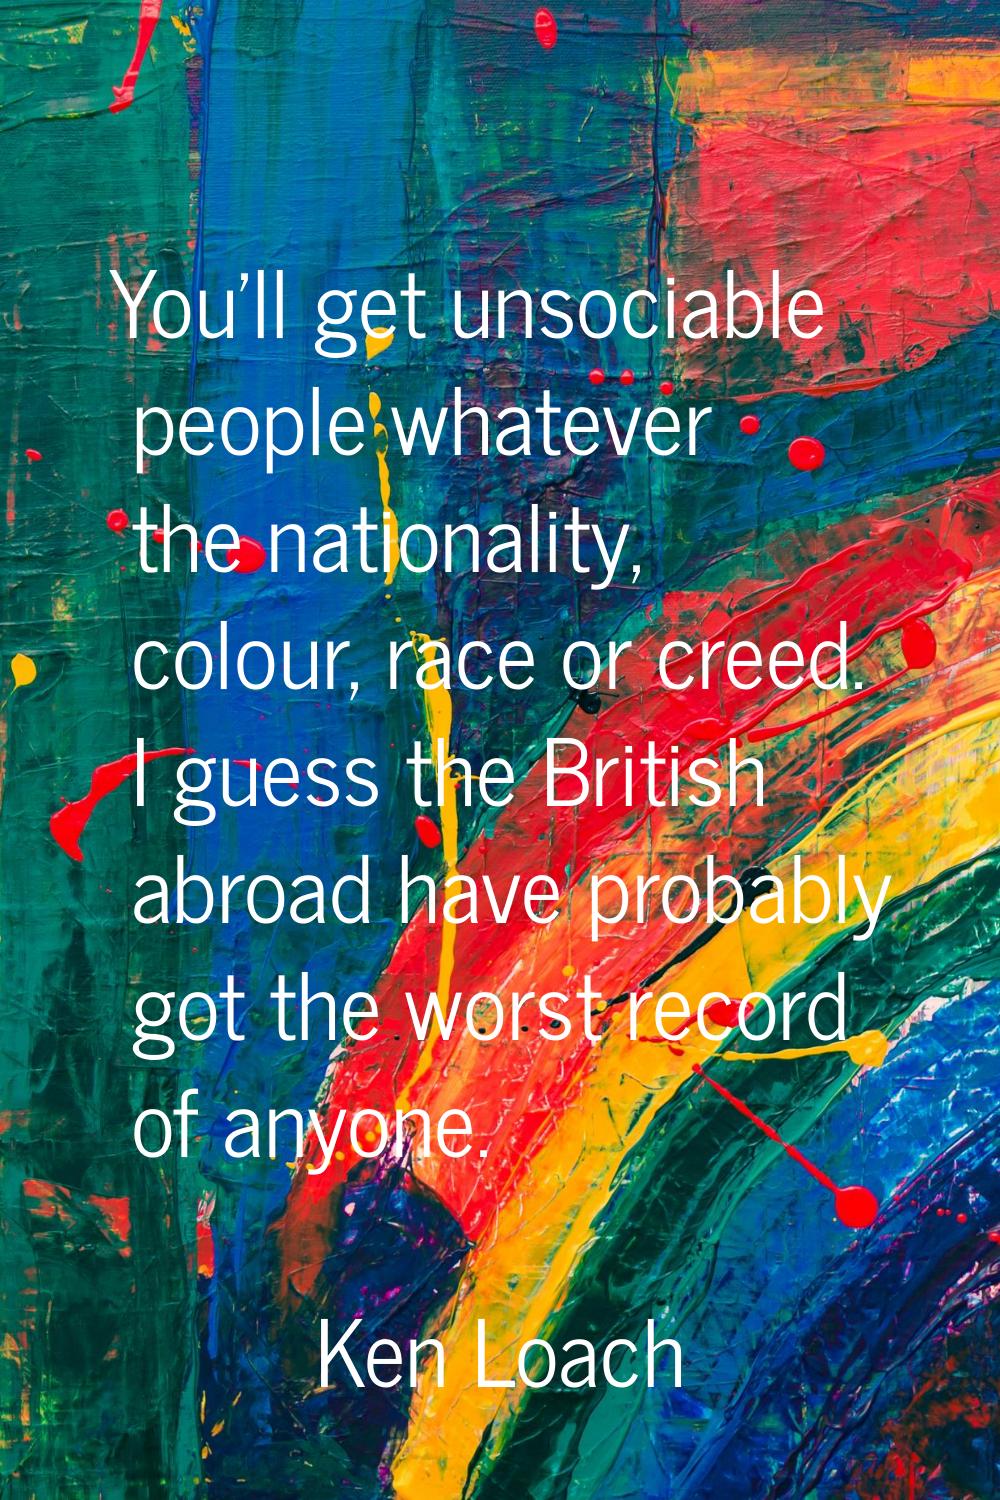 You'll get unsociable people whatever the nationality, colour, race or creed. I guess the British a